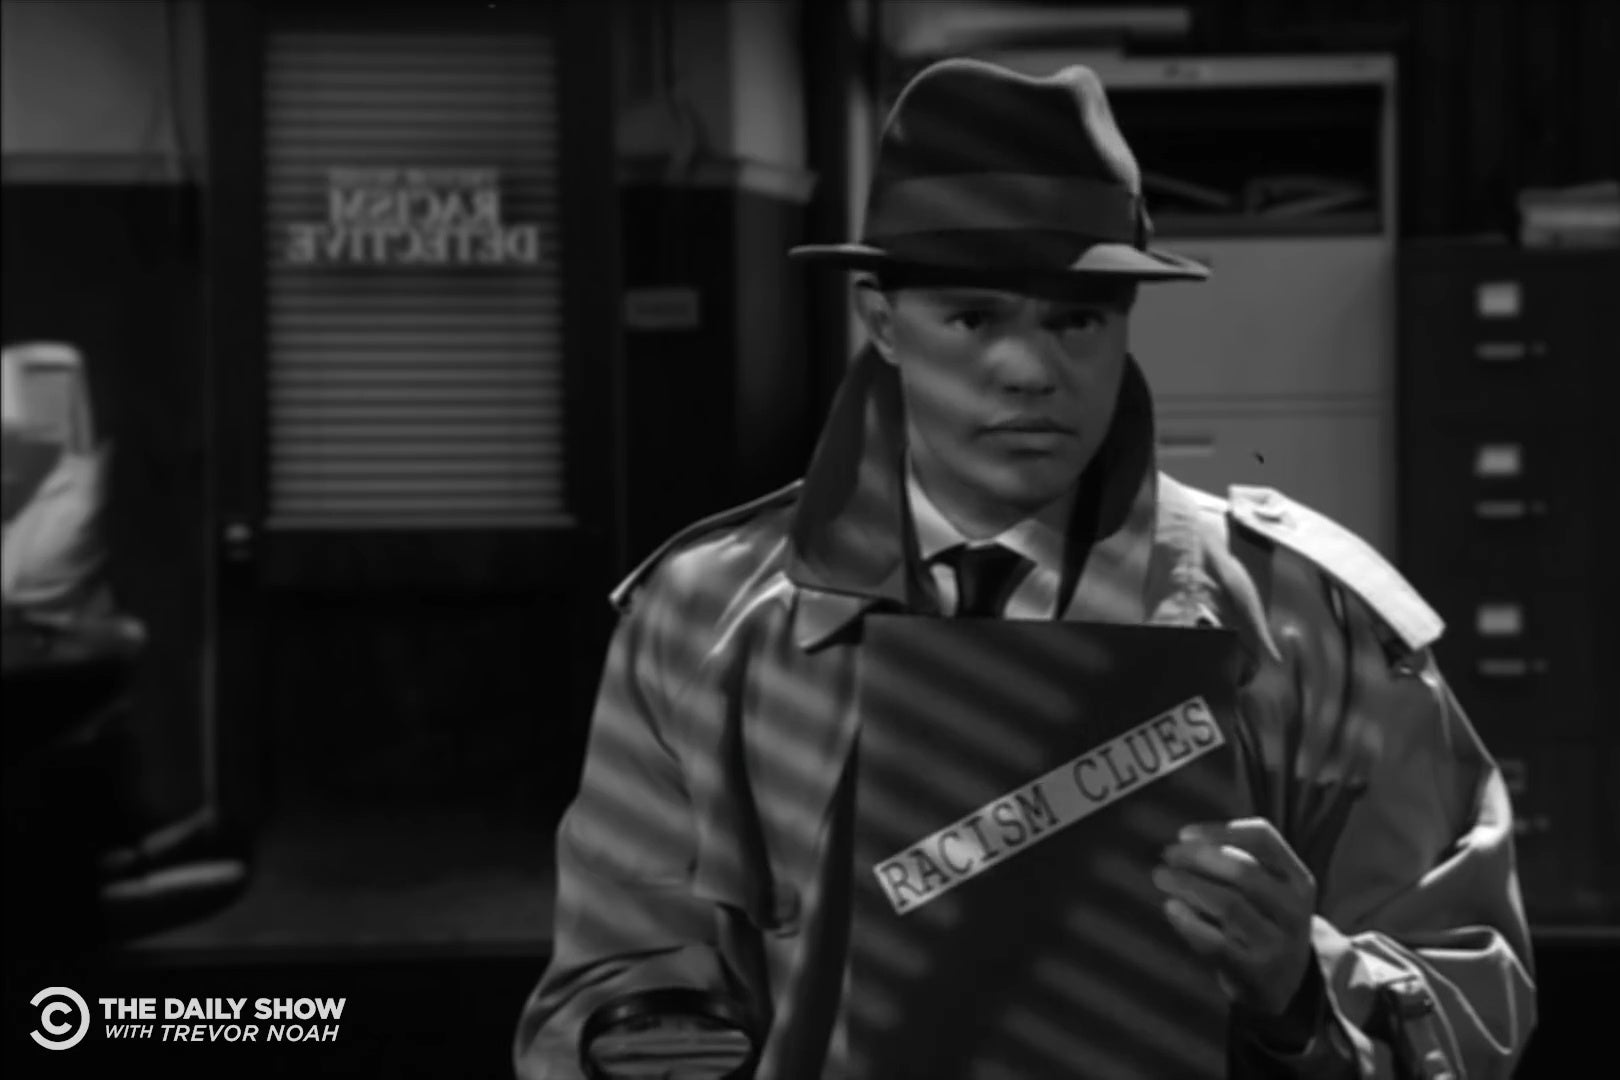 Trevor Noah dressed as a 1940s detective, holding a folder labeled "racism clues."